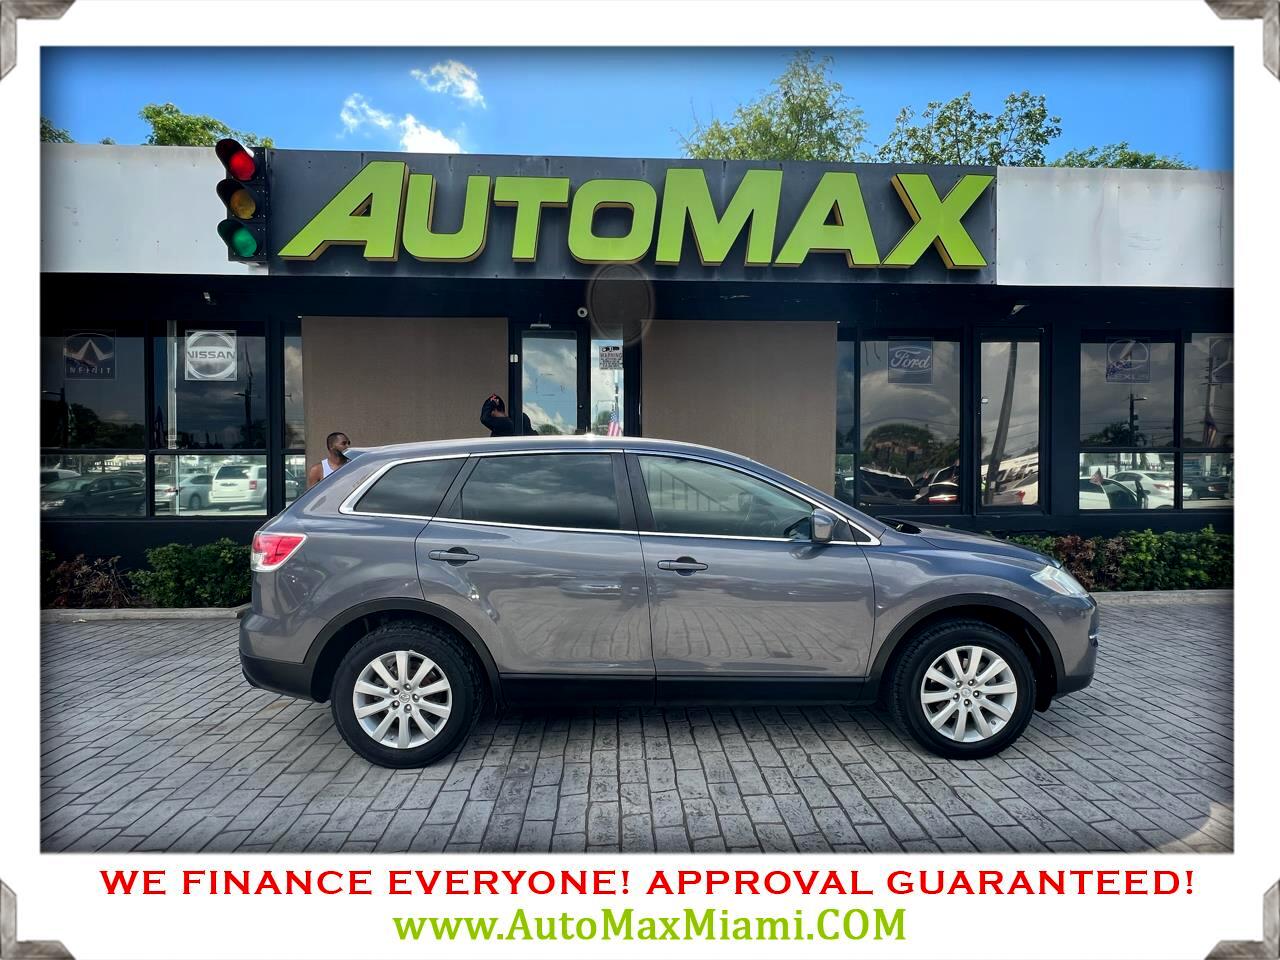 2008 Mazda CX-9 FWD 4dr Touring